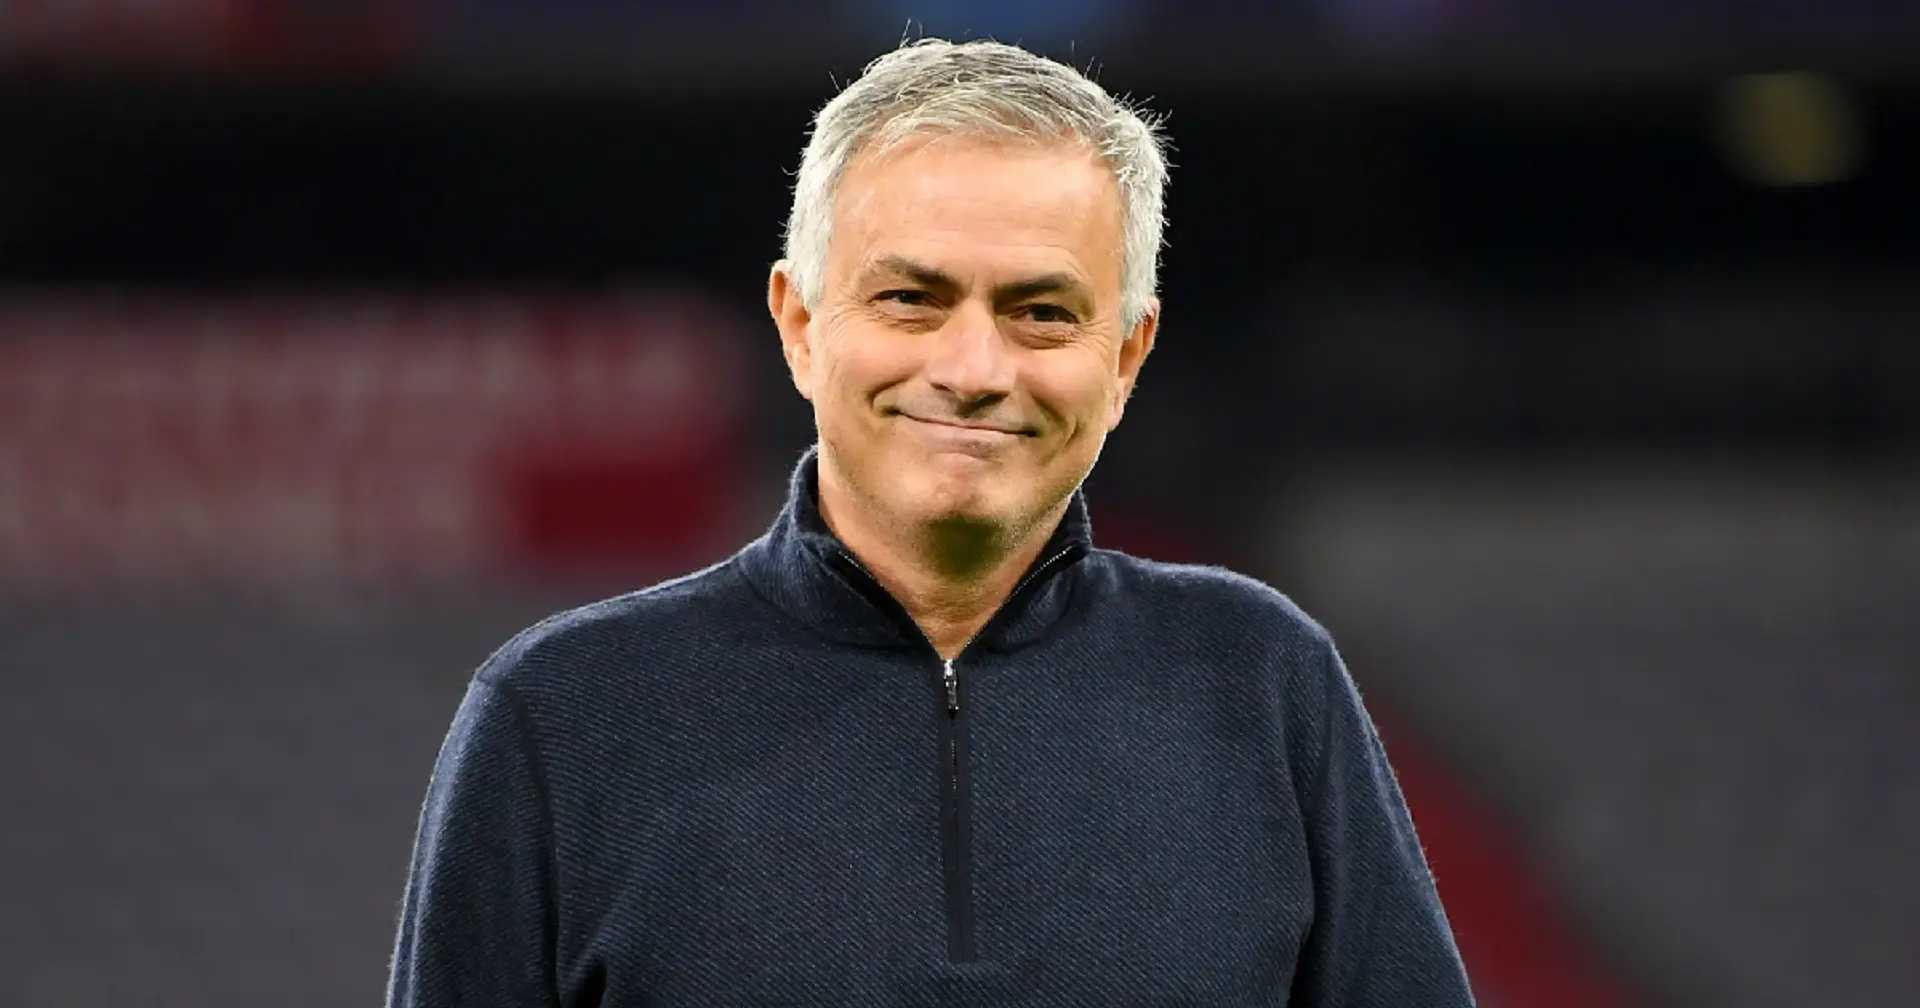 'I don’t think he will concern himself with the size of the goal but the size of the penalty box': Mourinho responds to Ole's goalpost comment 